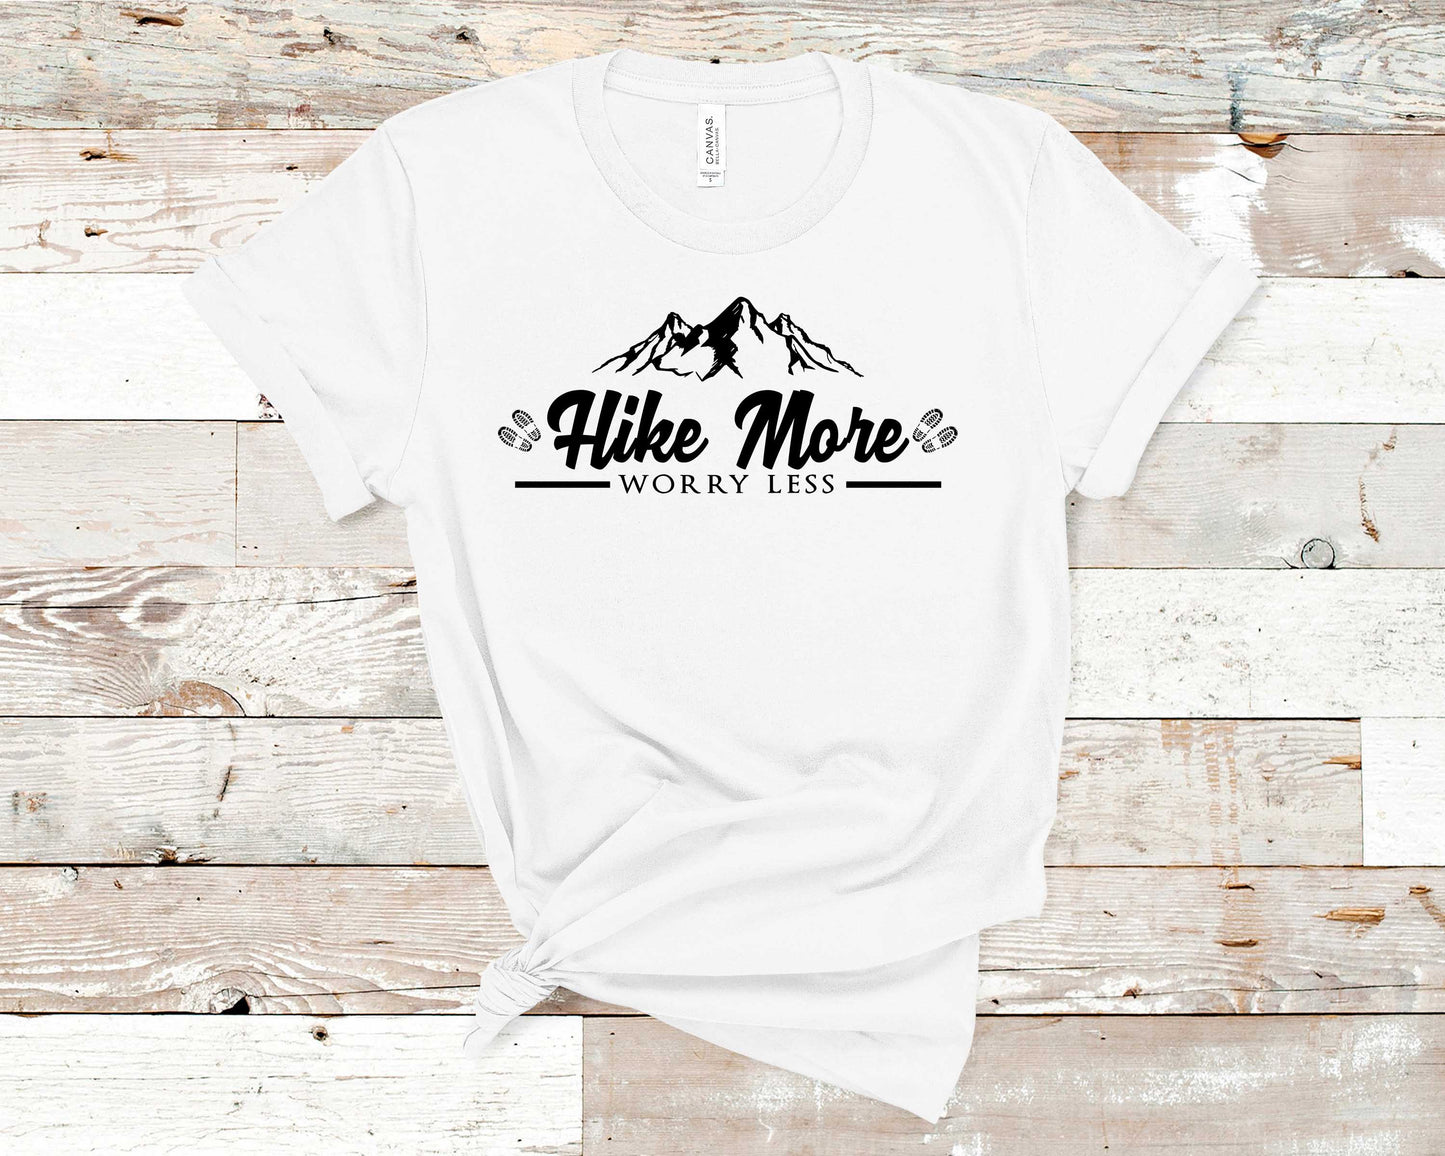 Hike More Worry Less - Fitness Shirt